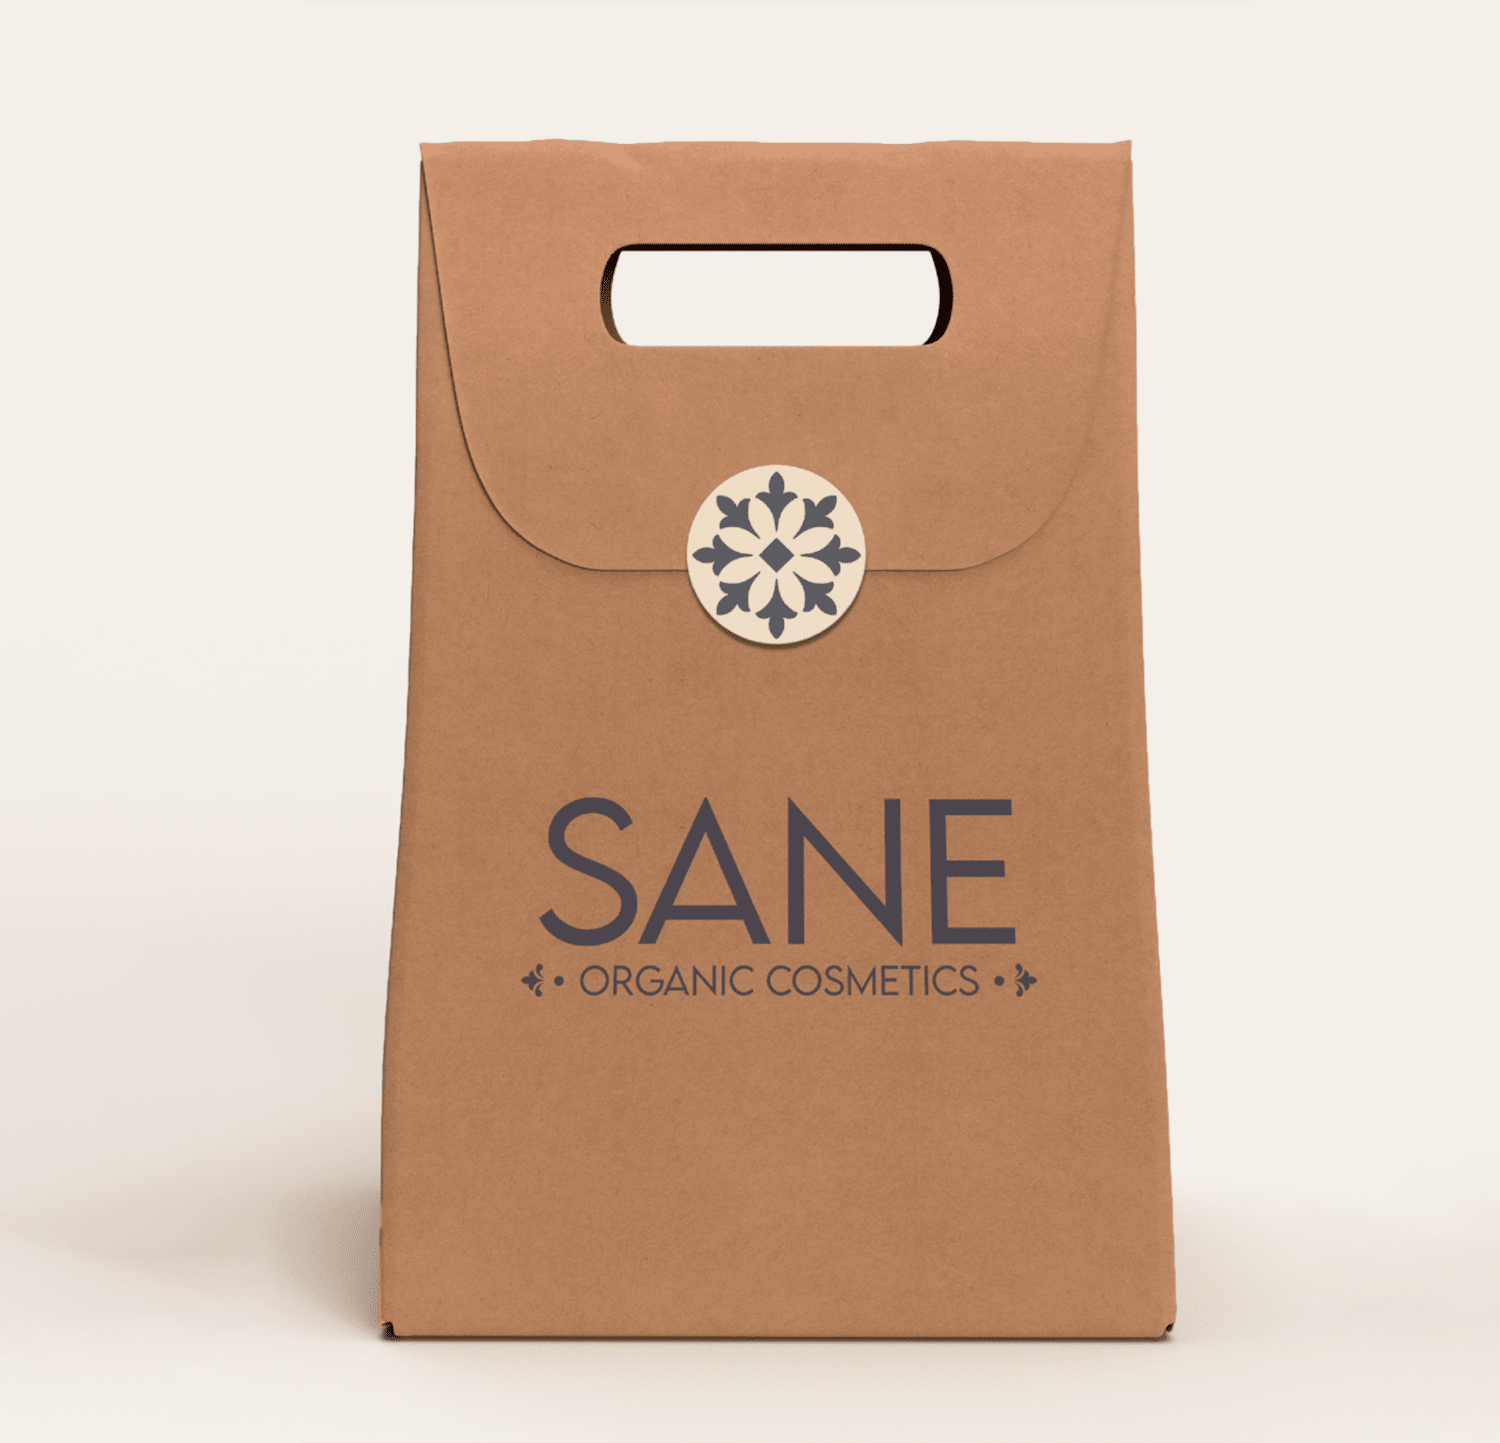 brown paper bag of cosmetics. With brand name printed